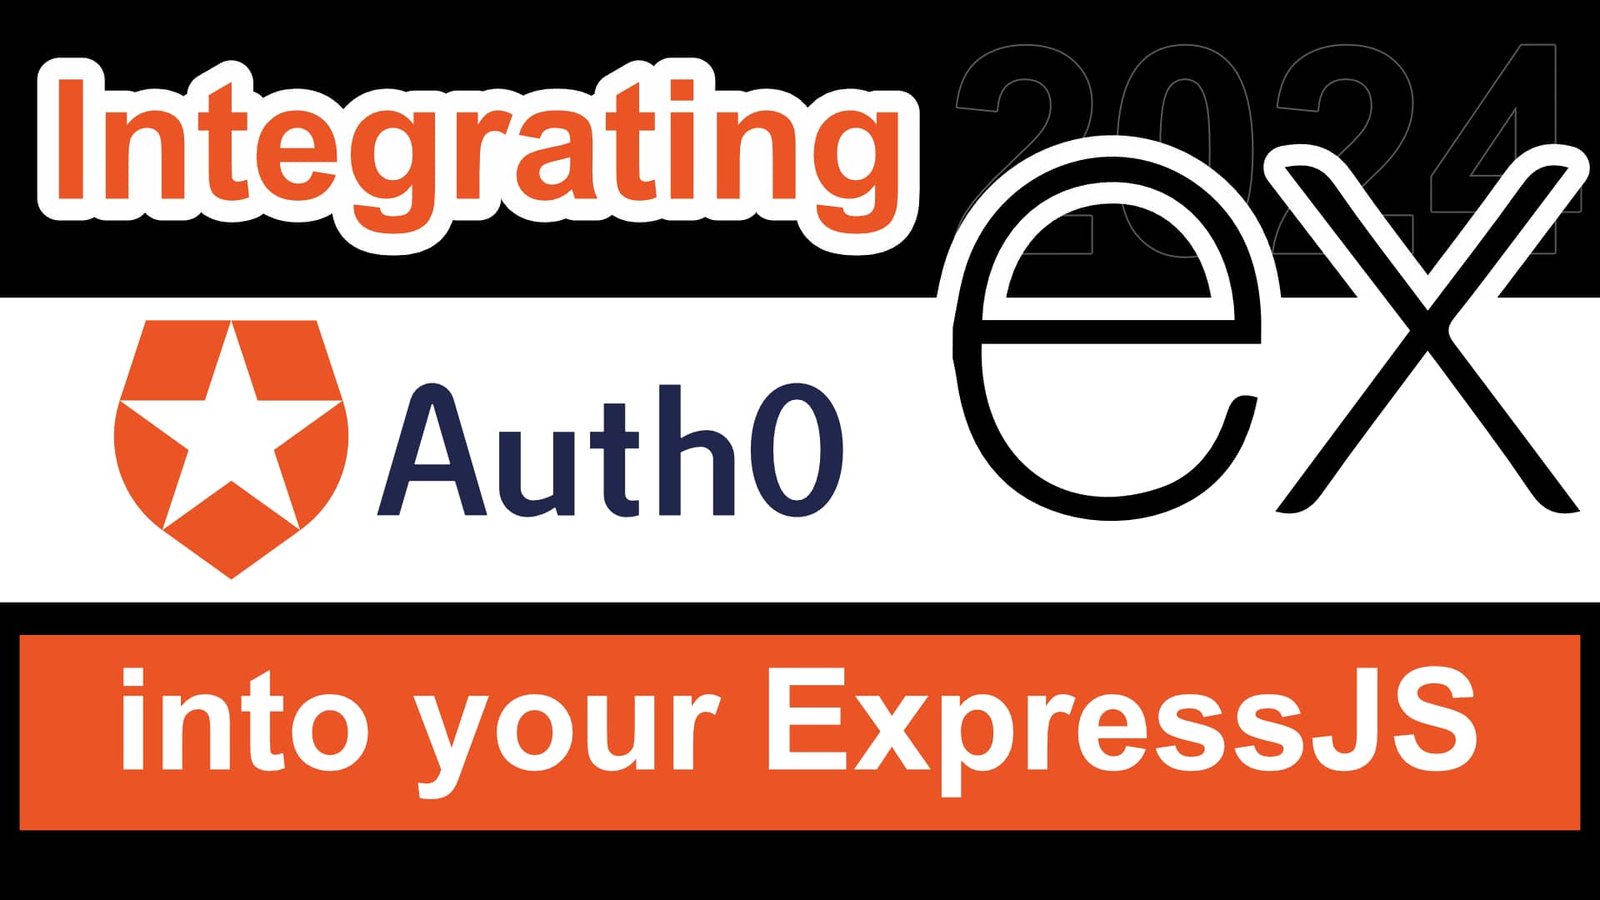 A banner showing the integration of Auth0 into a ExpressJS back-end, with logos and text.